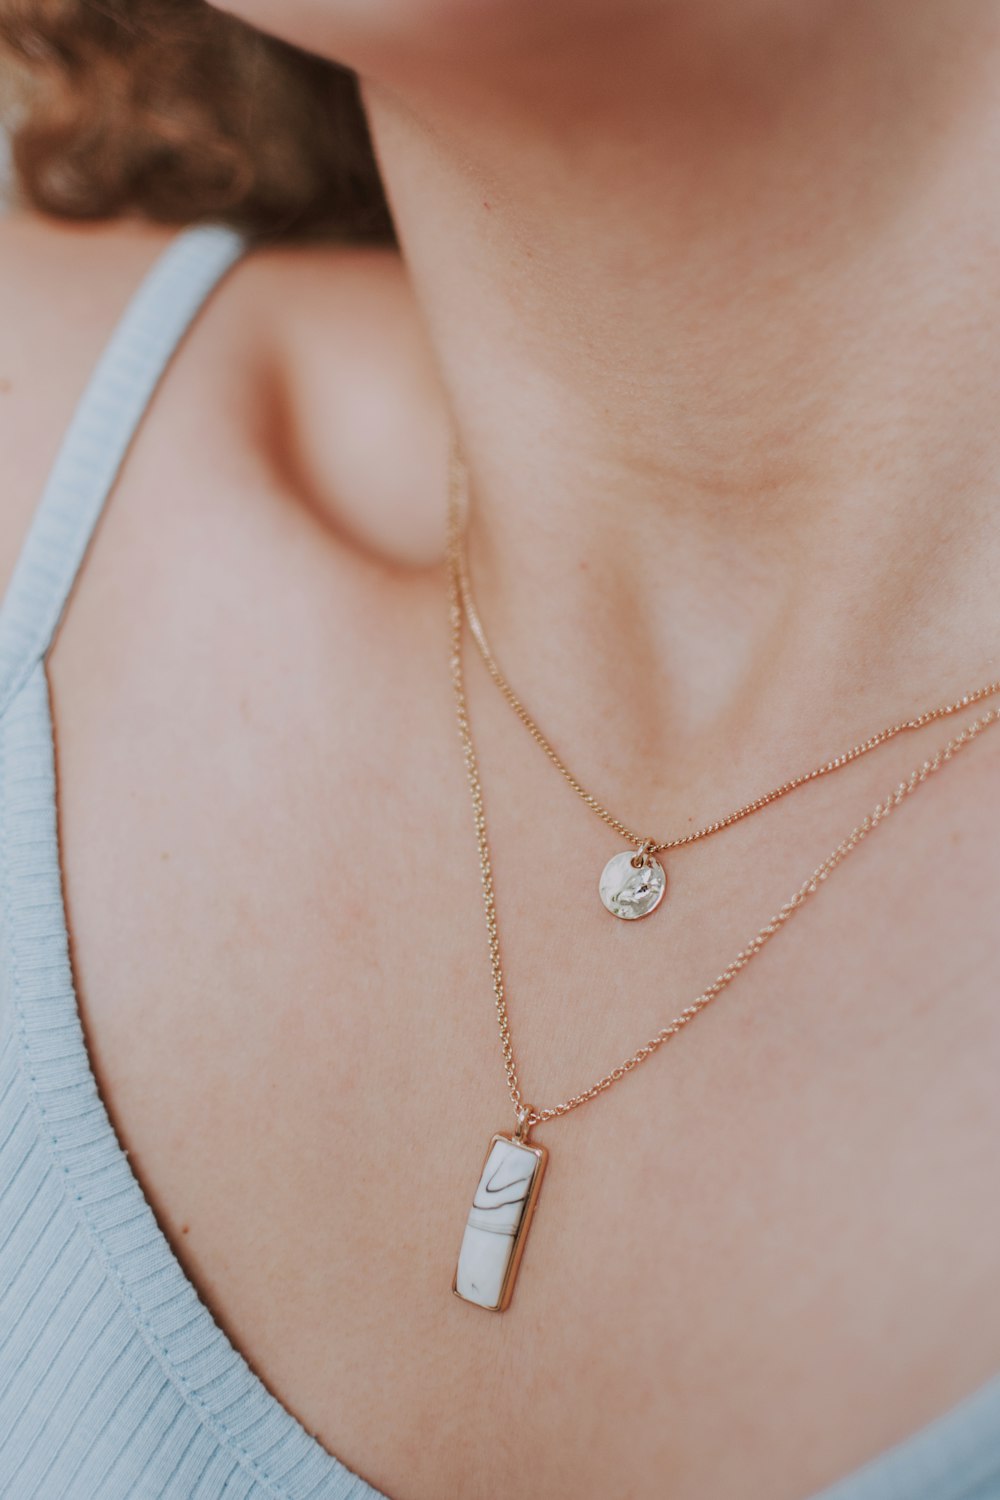 Woman wearing gold necklace with silver pendant photo – Free Necklace Image  on Unsplash